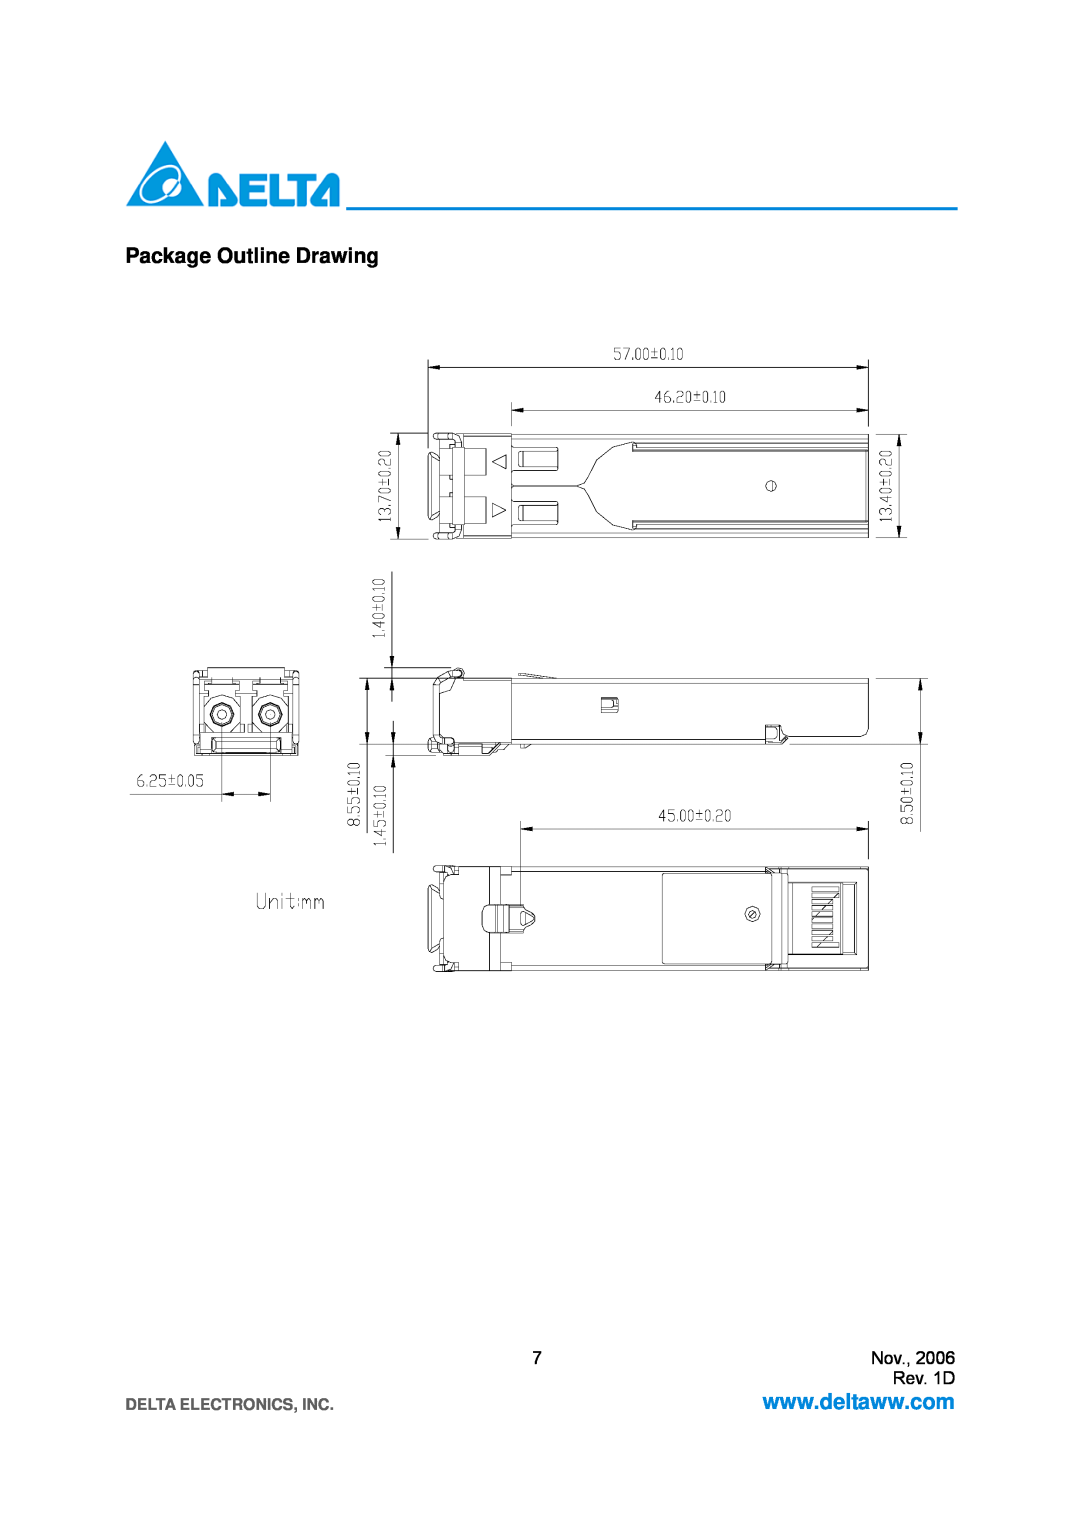 Delta Electronics LCP-2125 specifications Package Outline Drawing, Rev. 1D, Delta Electronics, Inc 